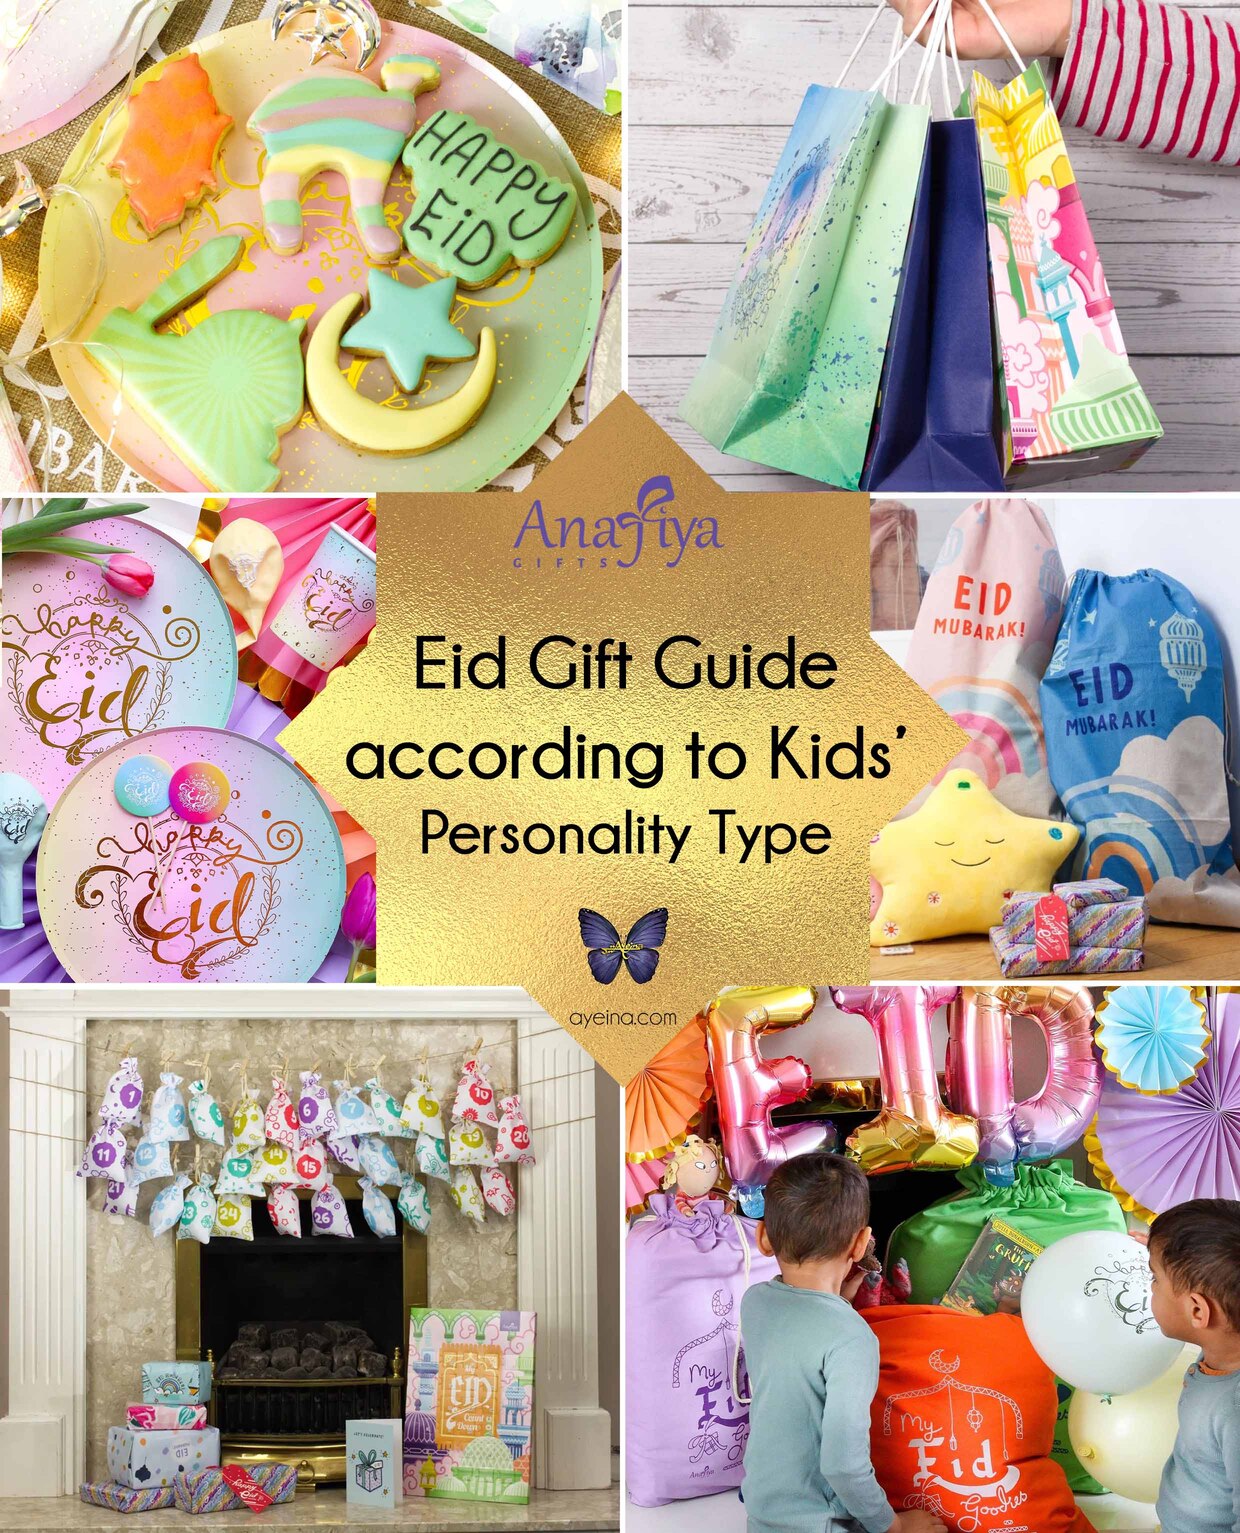 https://ayeina.com/wp-content/uploads/2022/03/eid-gift-guide-for-kids-personality-type-low-1.jpg